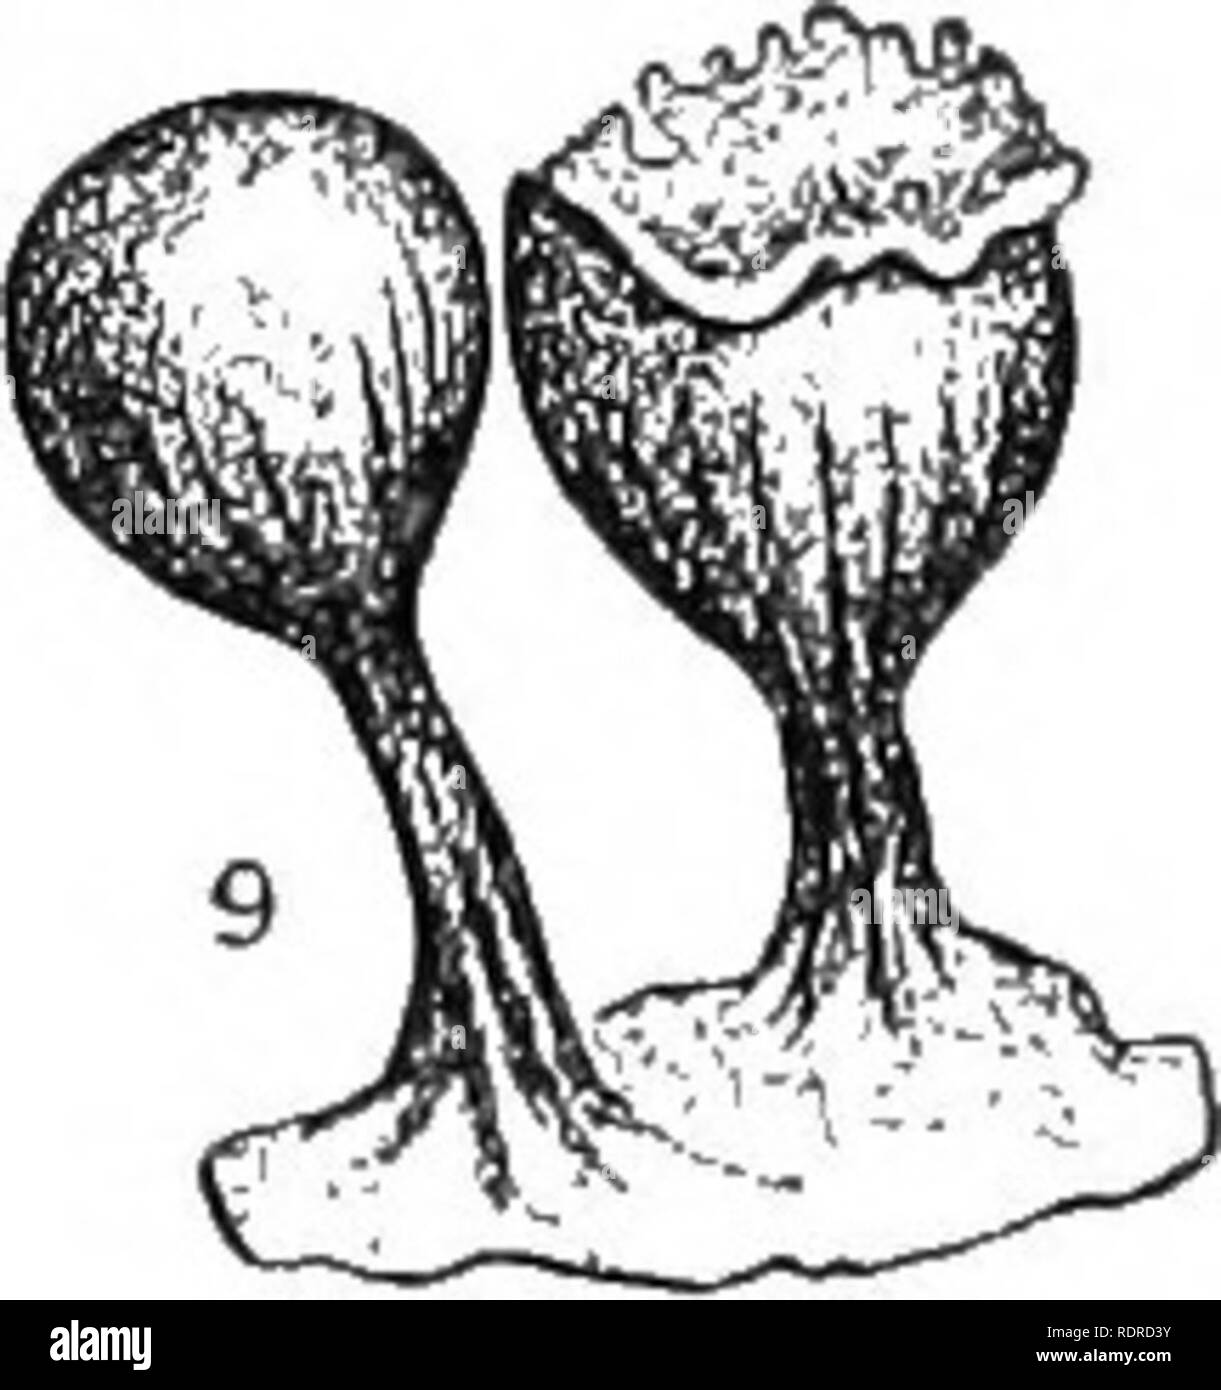 . Introduction to botany. Botany. Fig. 132. Myxomycete or Slime Mould, i, a bit of Plasmodium. 2, a small Plasmodium. 3, a spore. 4 and 5, protoplast escaping from the spore. 6 and 7, stages suc- ceeding s, motile protoplasts which finally fuse to form 2 and i. 8 and 9, dif- ferent forms of sporangia bearing spores such as 3. After Prantl and Massey. boundary line between the lowest plants and animals, but the character and nature of formation of their spores seem to warrant their classification among plants. In its vegeta- tive or Plasmodium state (see Fig. 132) a slime mouid creeps. Please n Stock Photo